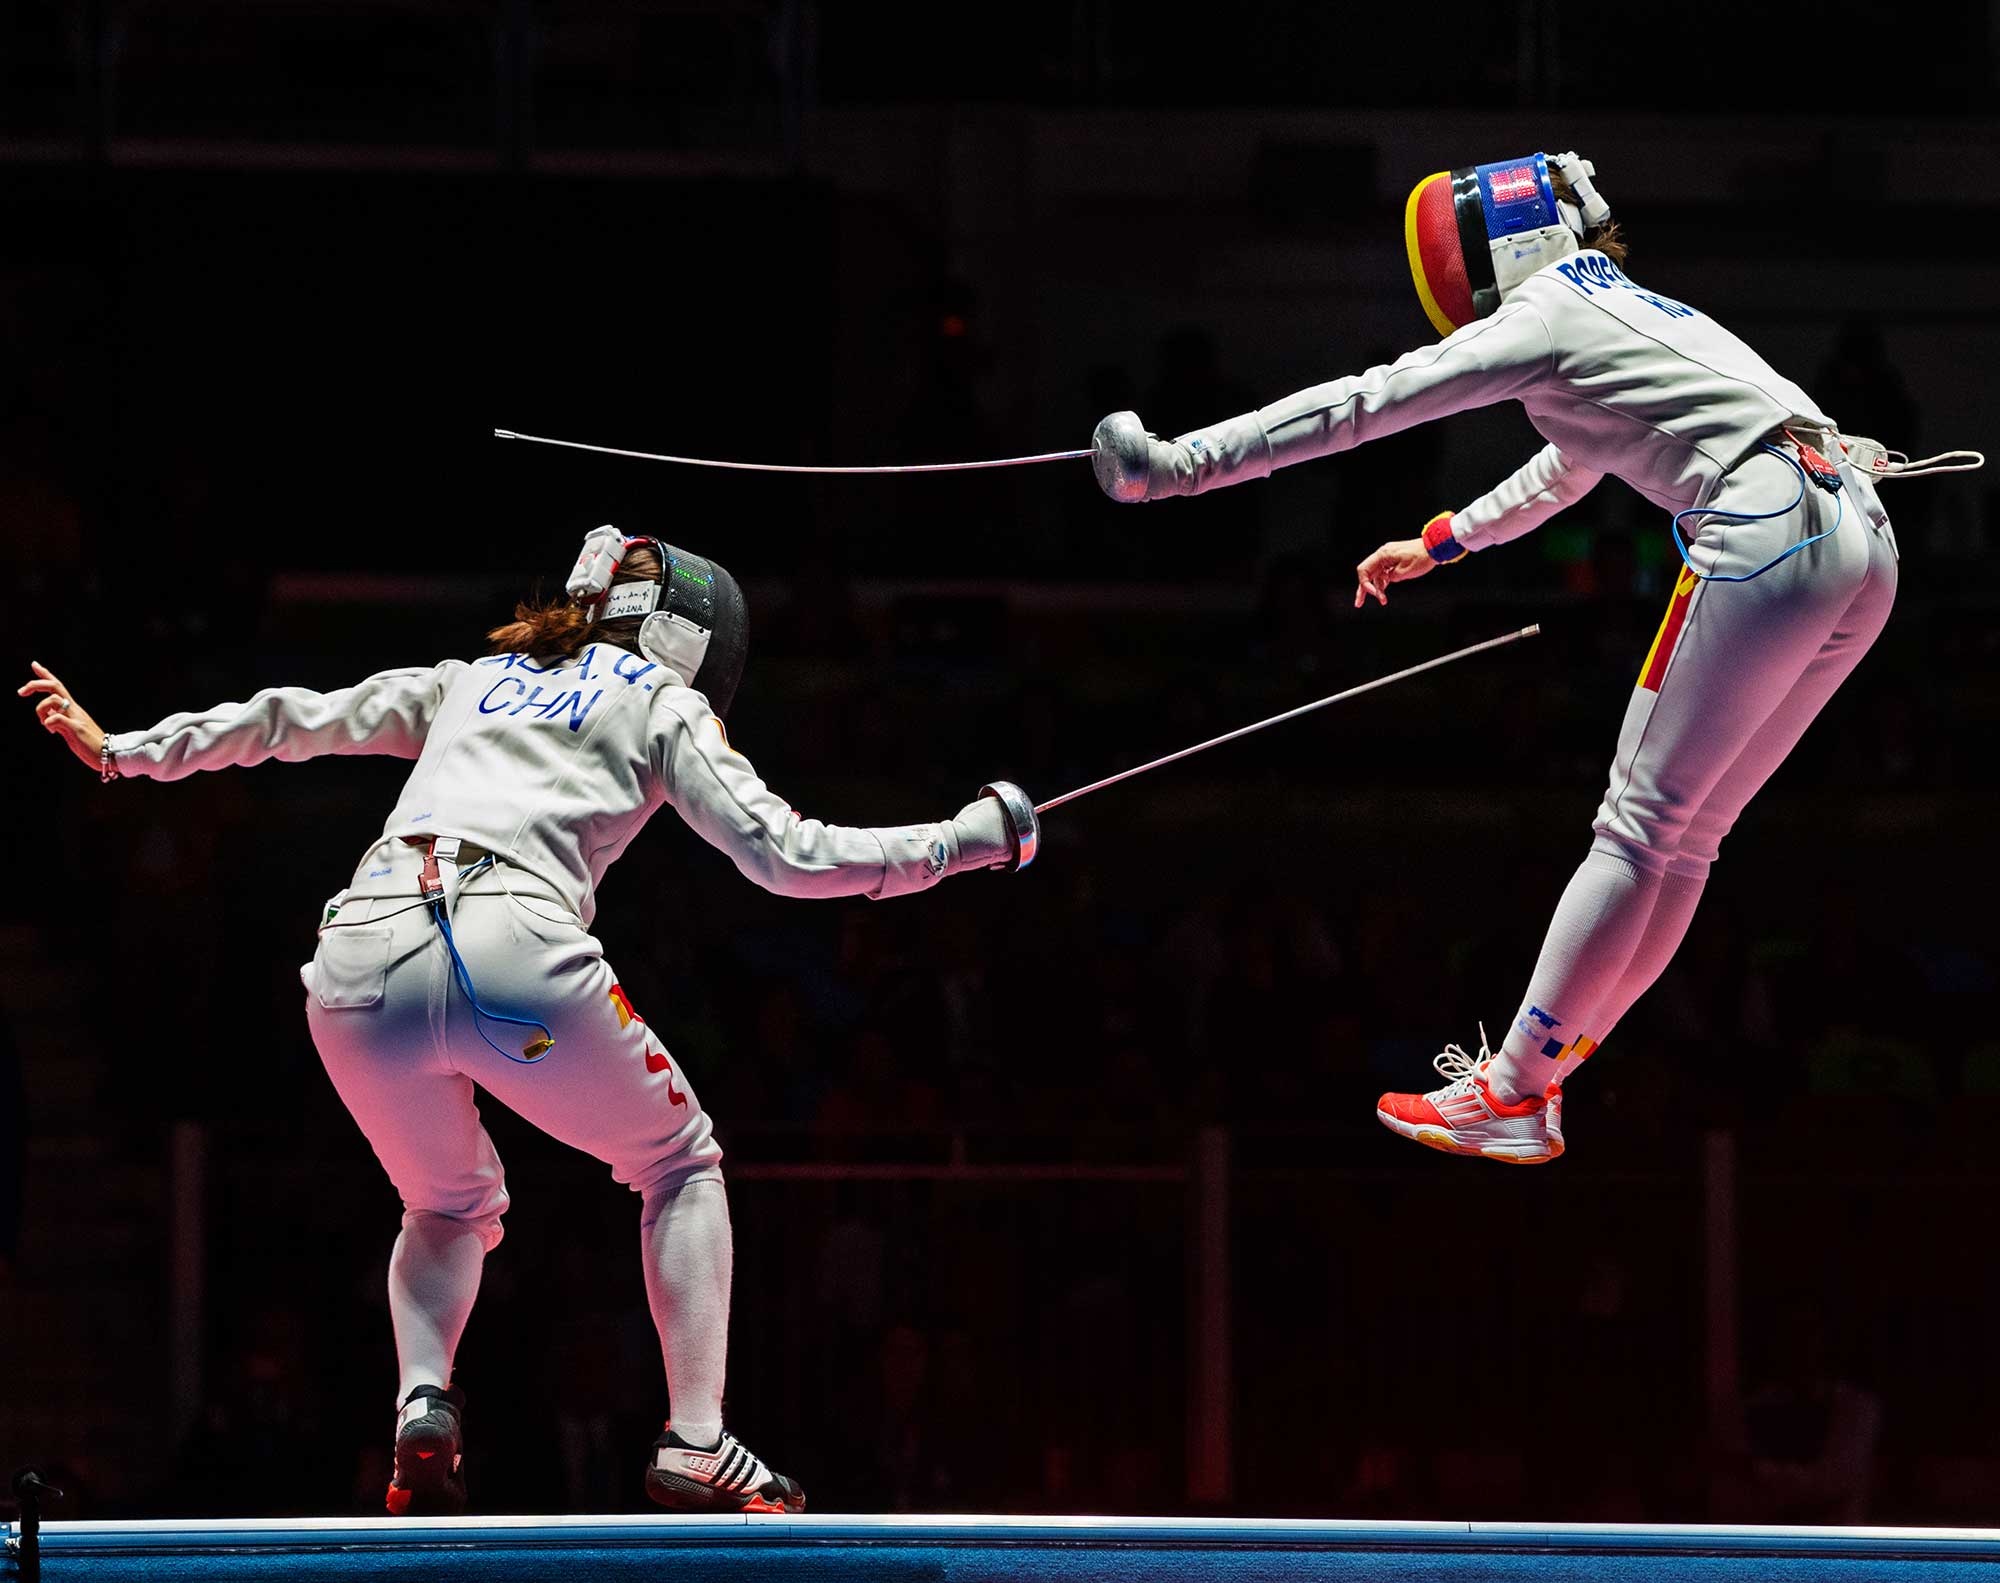 Fencing: The World Fencing Championship duel, Organized by the International Fencing Federation. 2000x1590 HD Wallpaper.